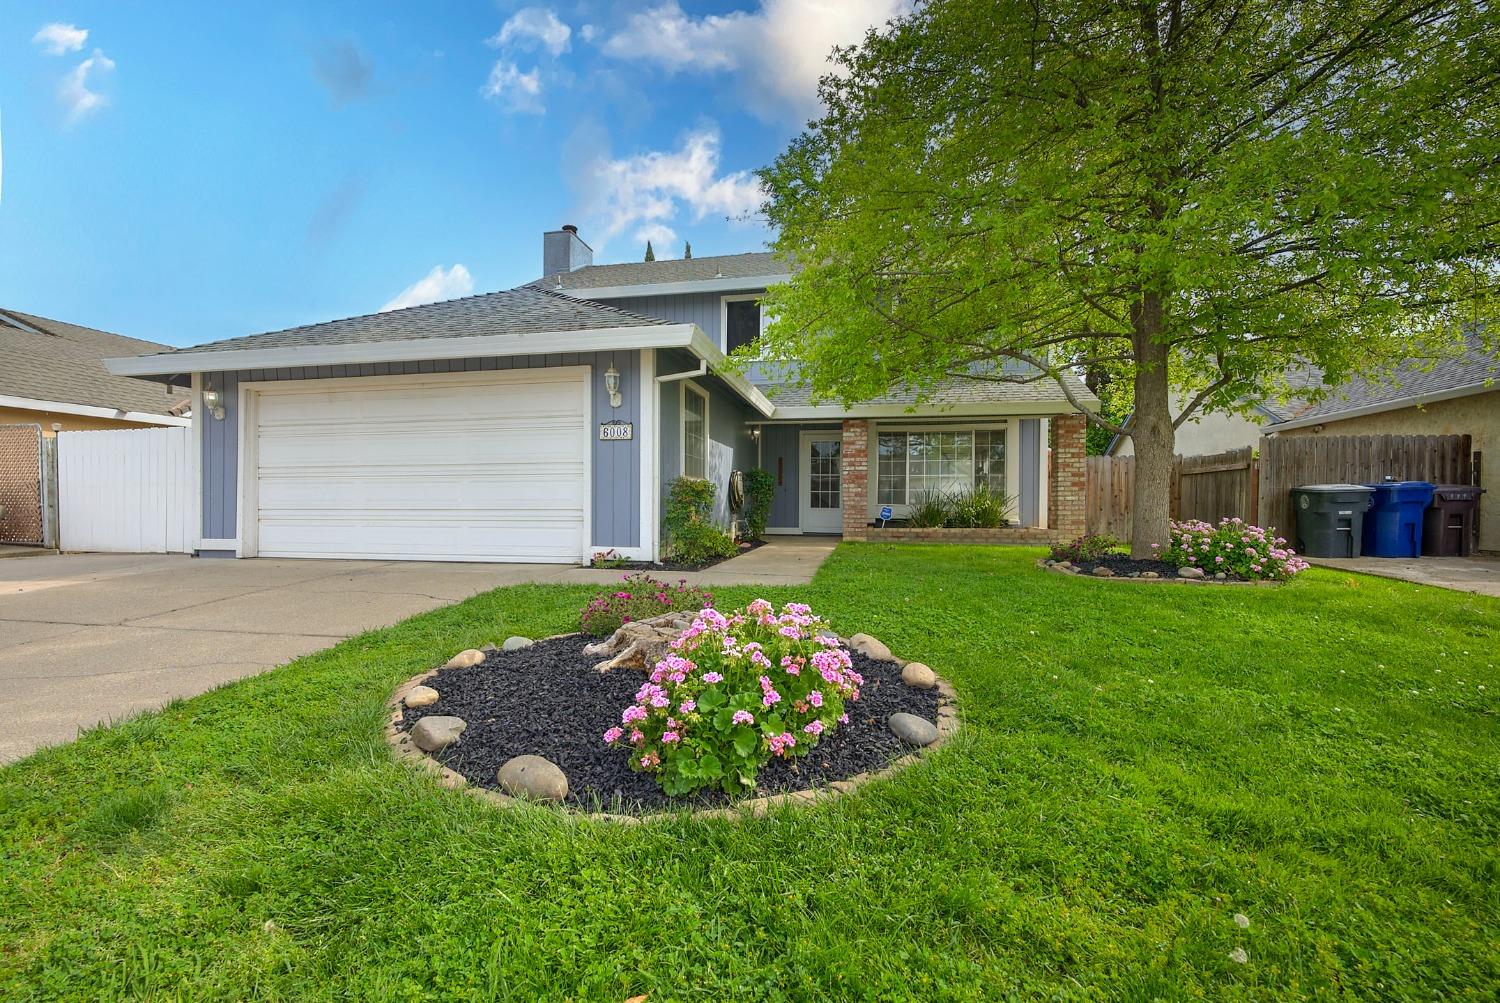 Welcome to 6008 Covewood Ct! This wonderful home is nestled in a serene court, offering tranquility 